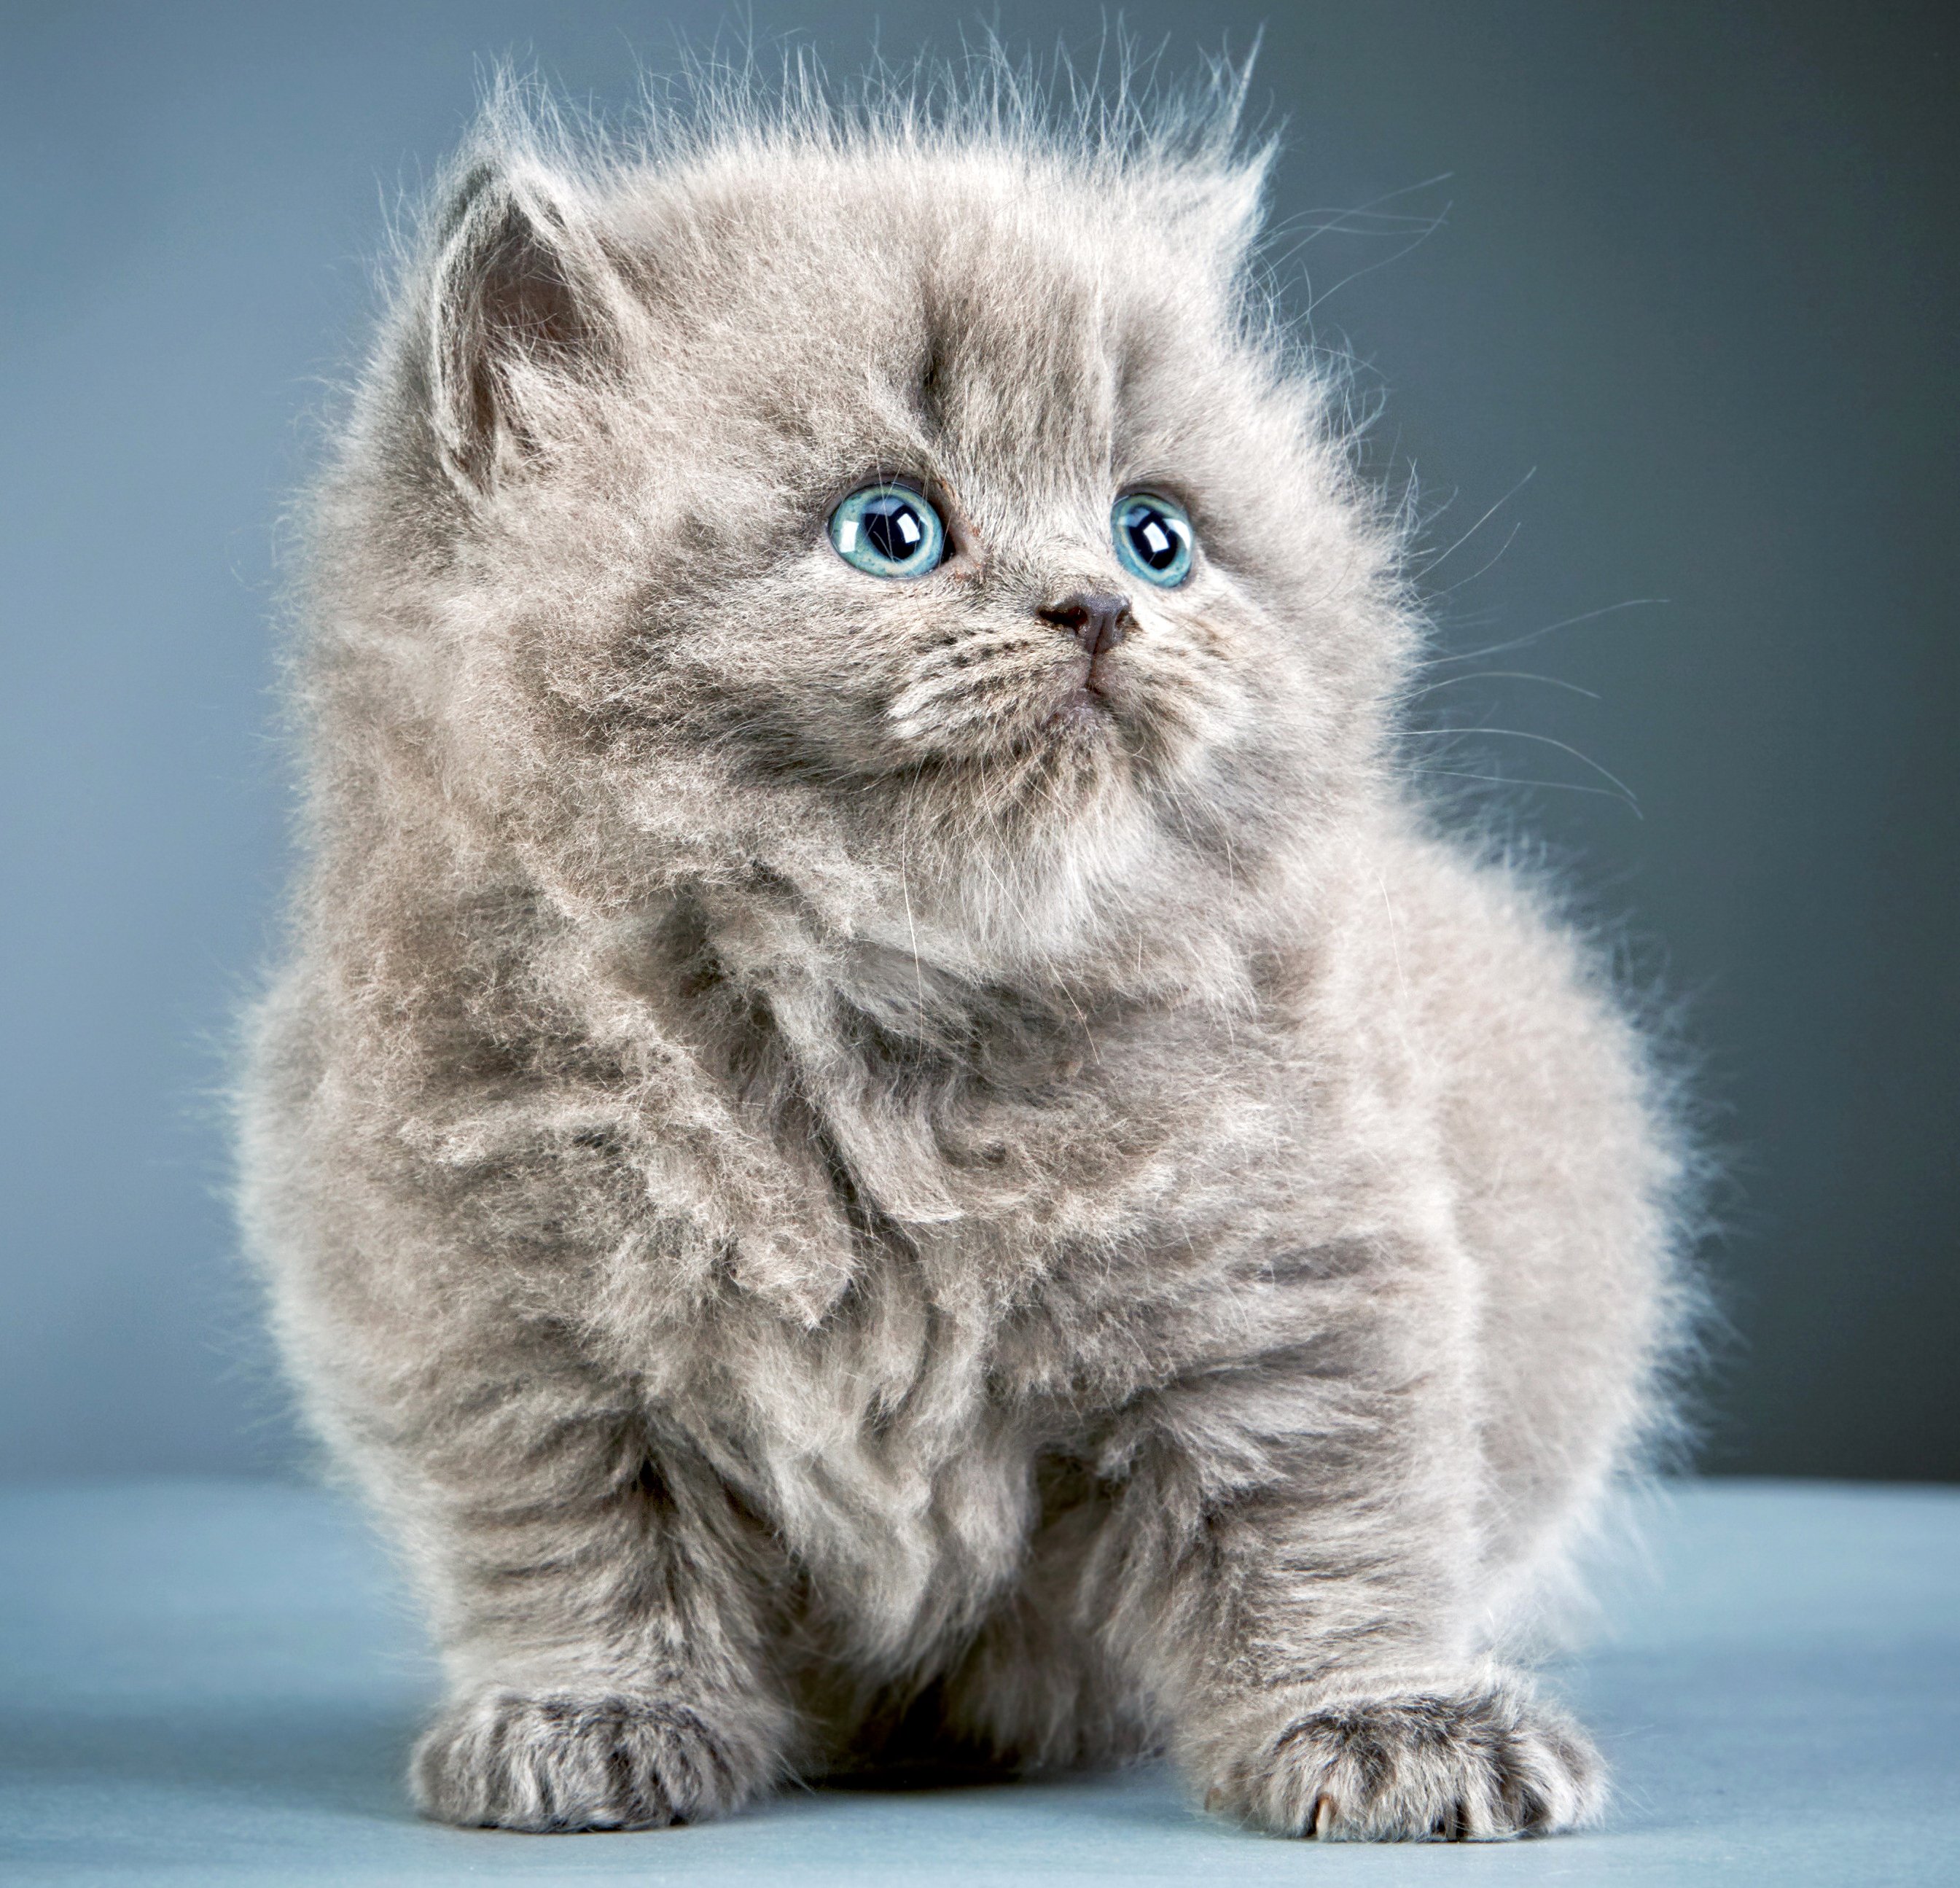 cats, Kittens, Glance, Grey, Fluffy, Animals, Wallpapers Wallpapers HD